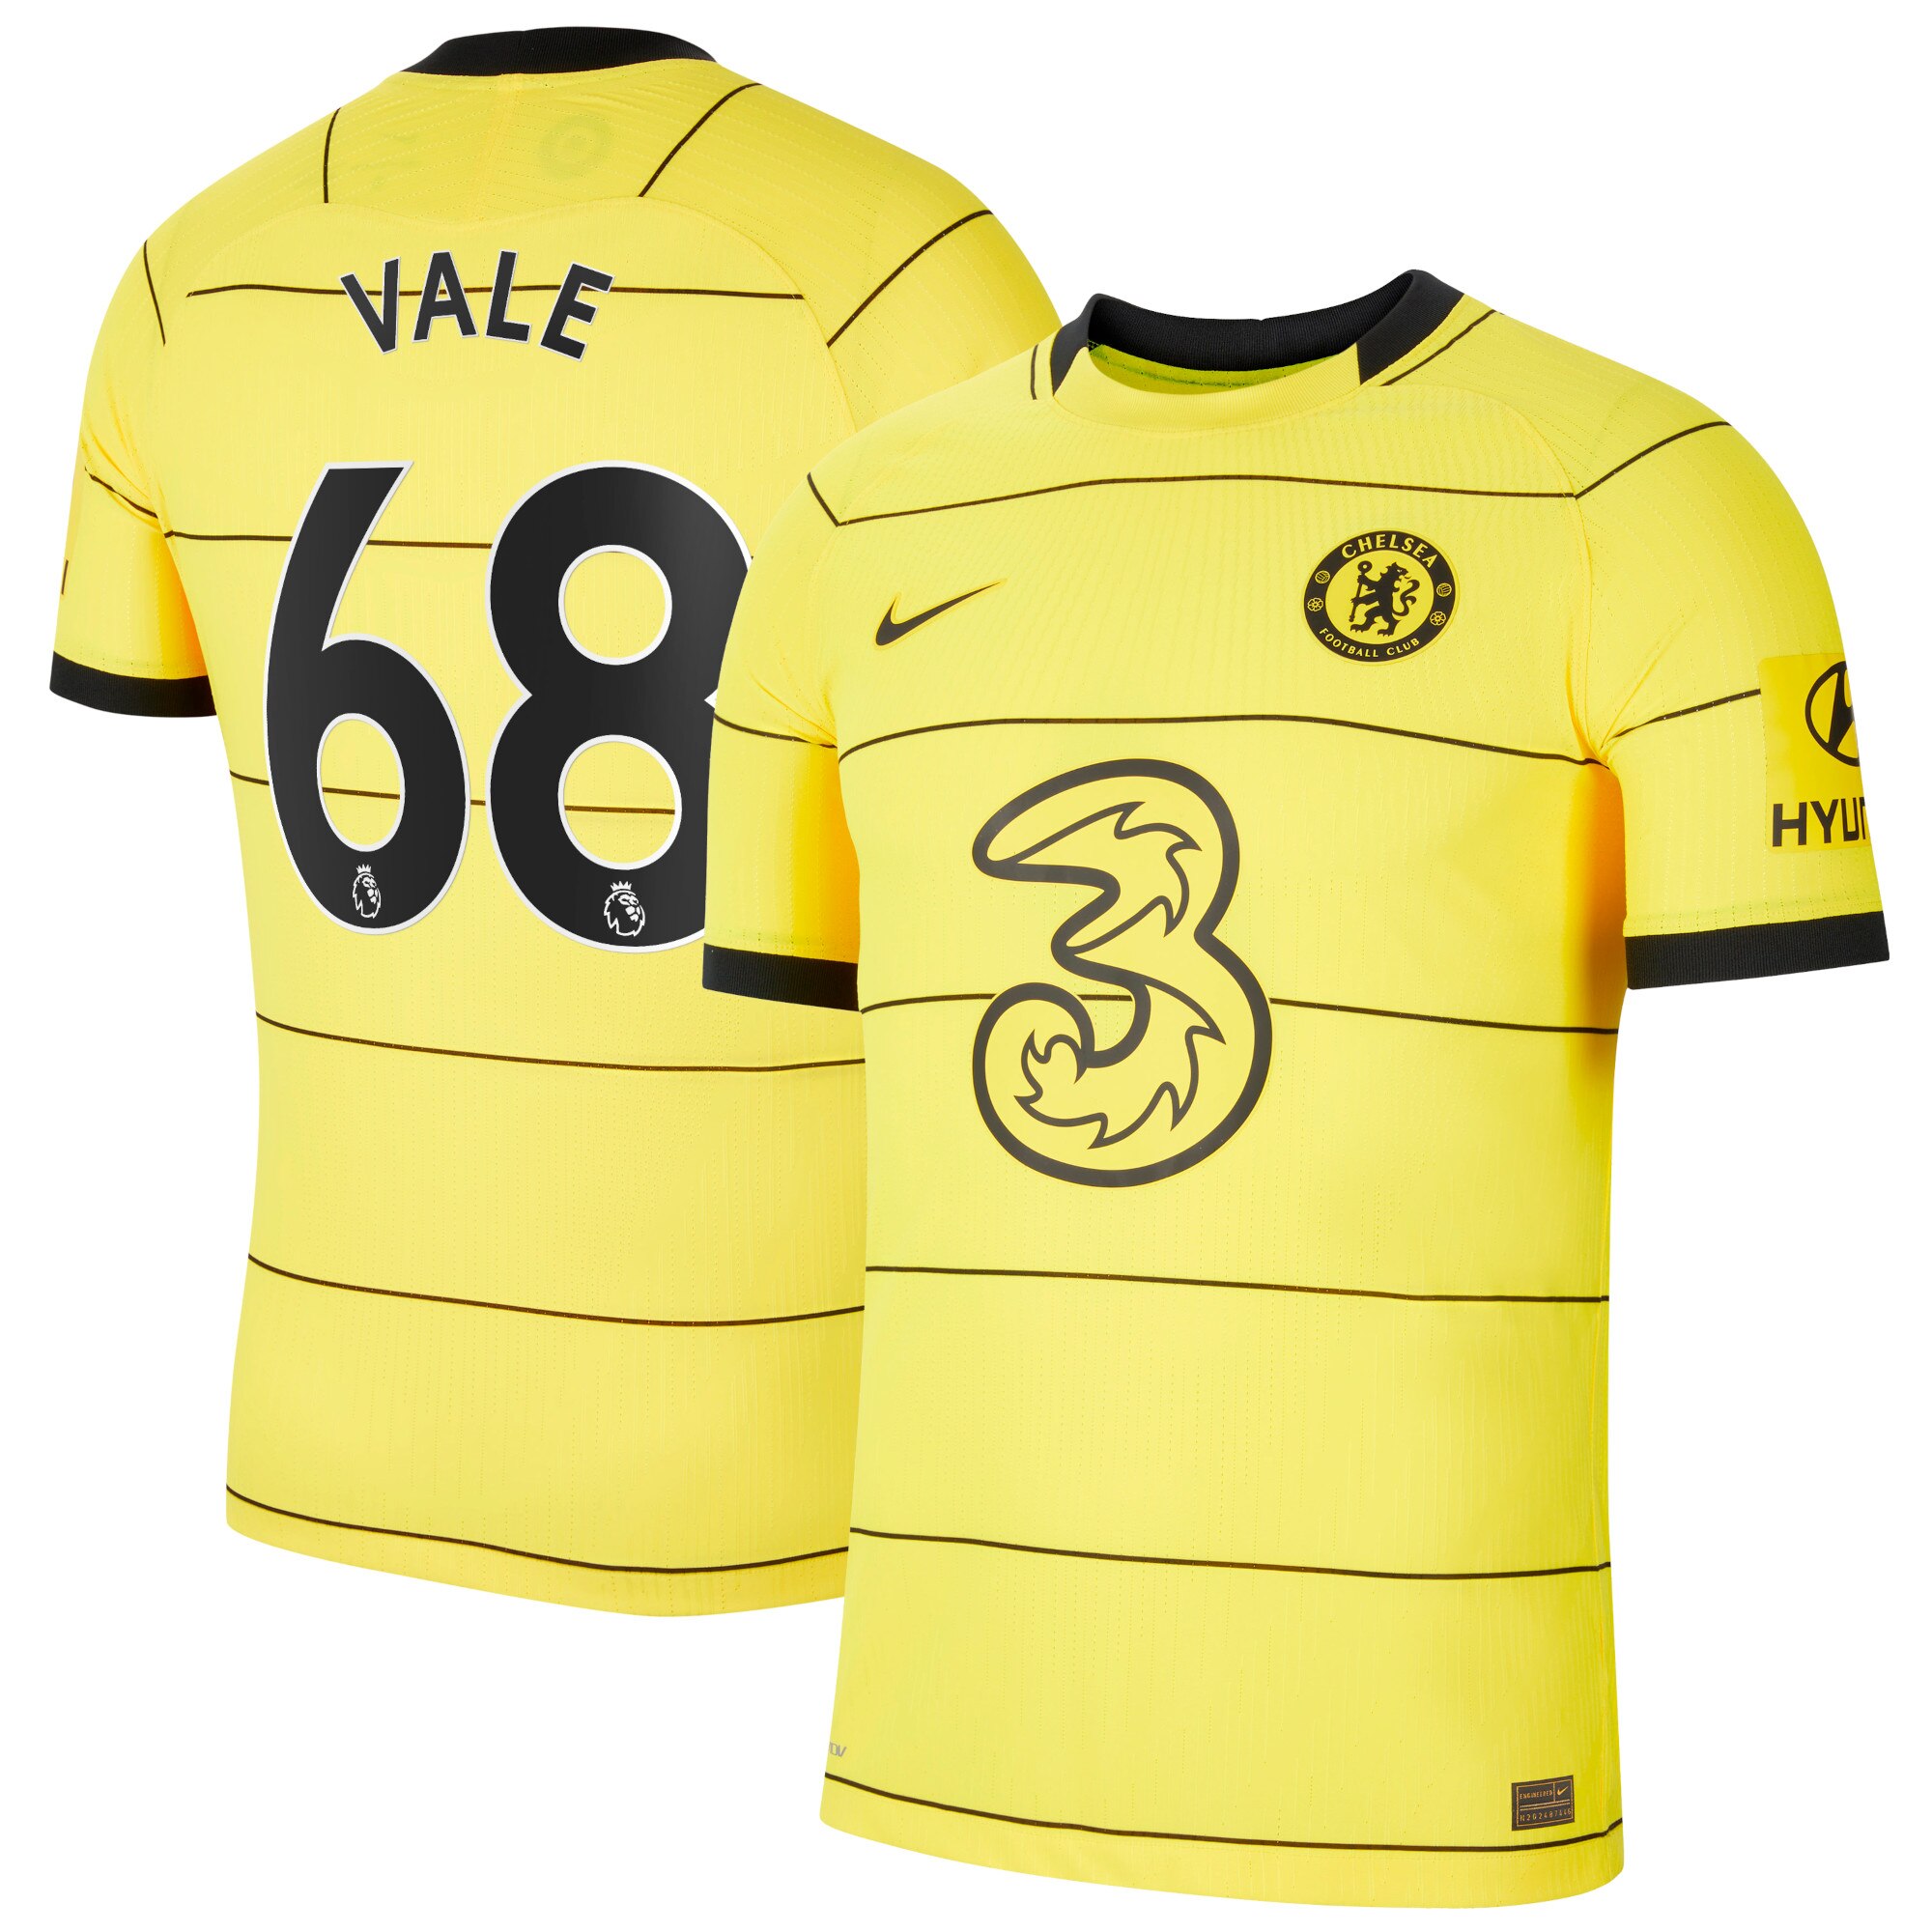 Chelsea Away Vapor Match Shirt 2021-22 with Vale 68 printing